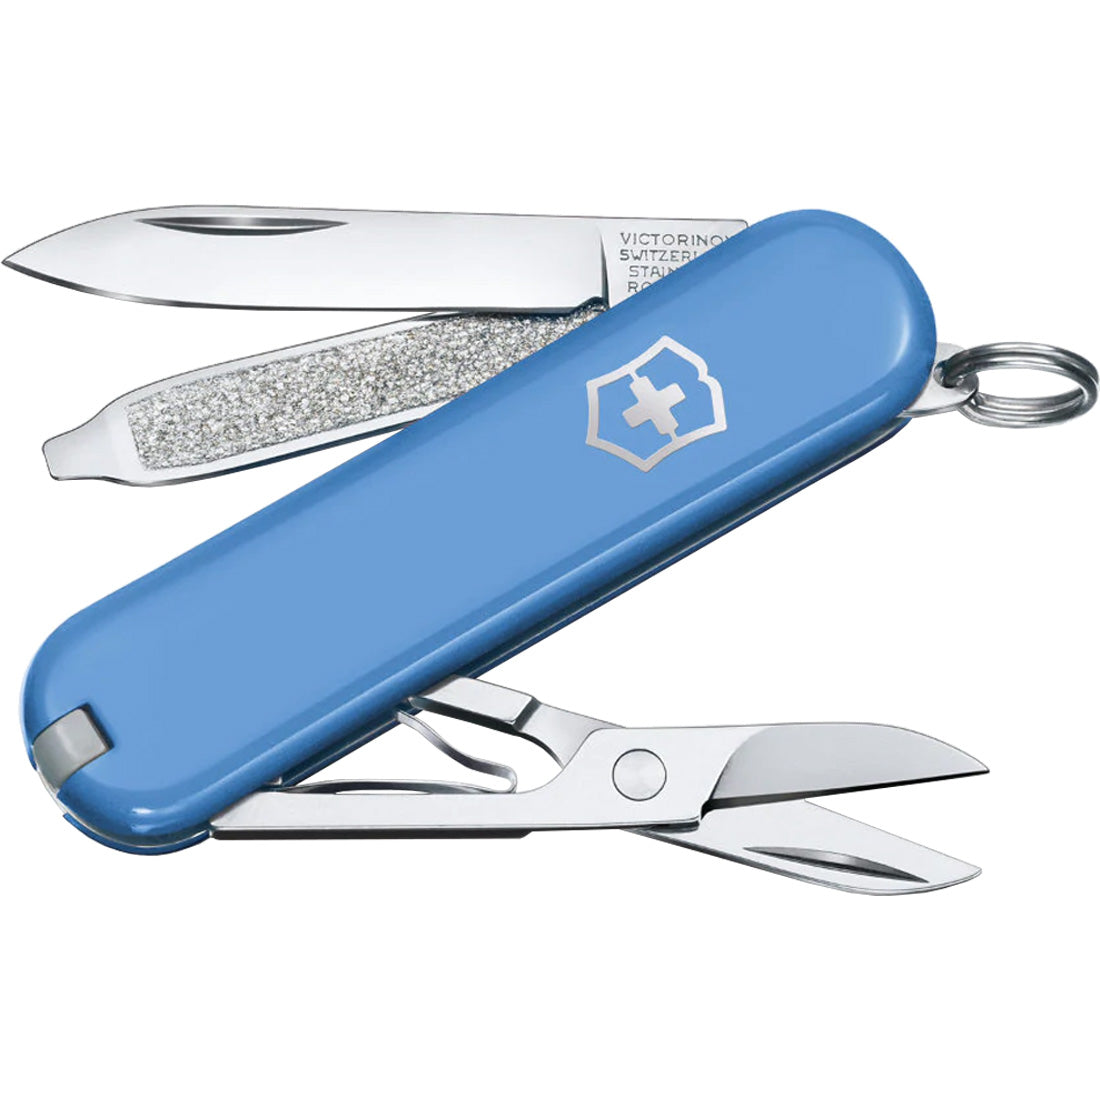 Swiss Army Knives Classic SD